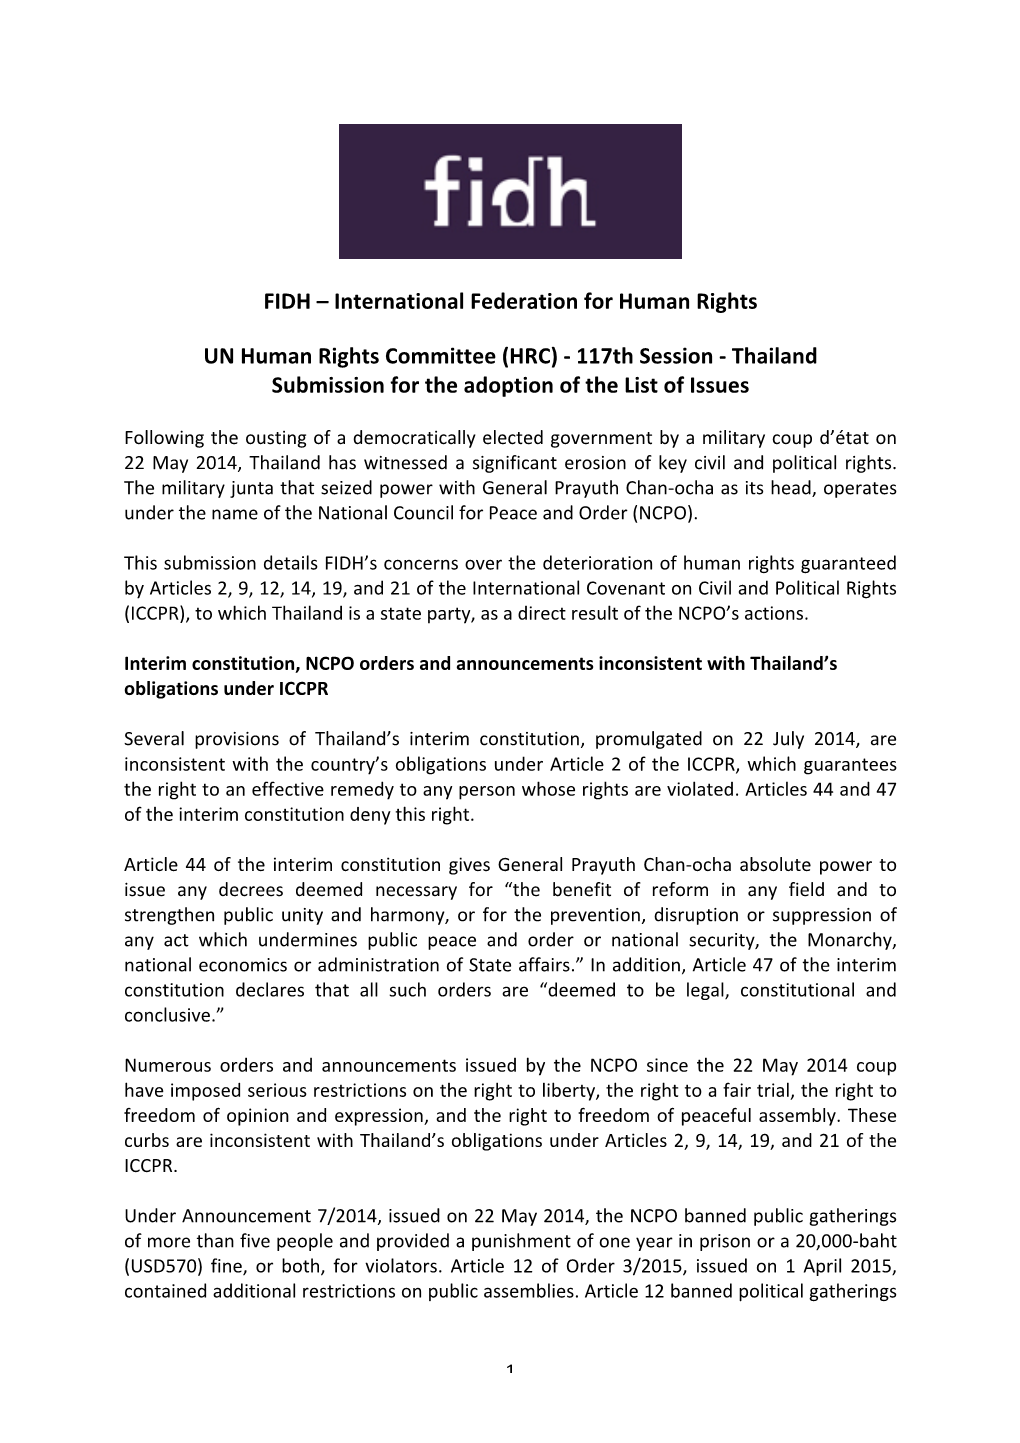 FIDH – International Federation for Human Rights UN Human Rights Committee (HRC)